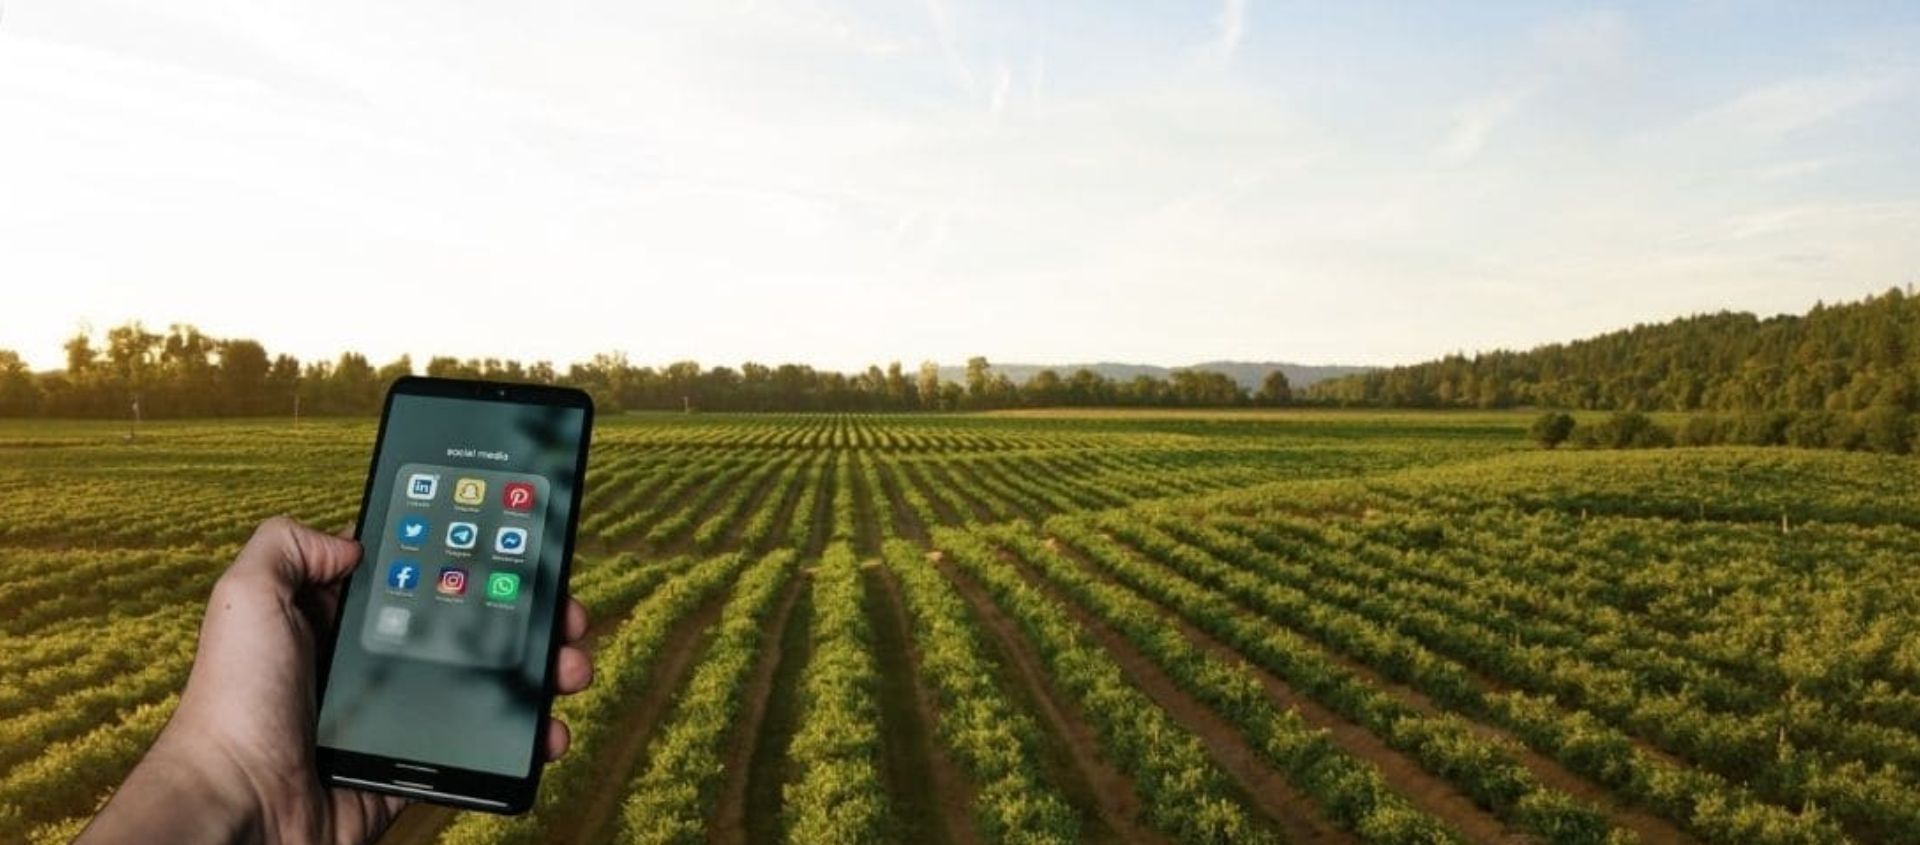 Photo for: Social Media for Wineries: Cracking Success in a Crowded Market